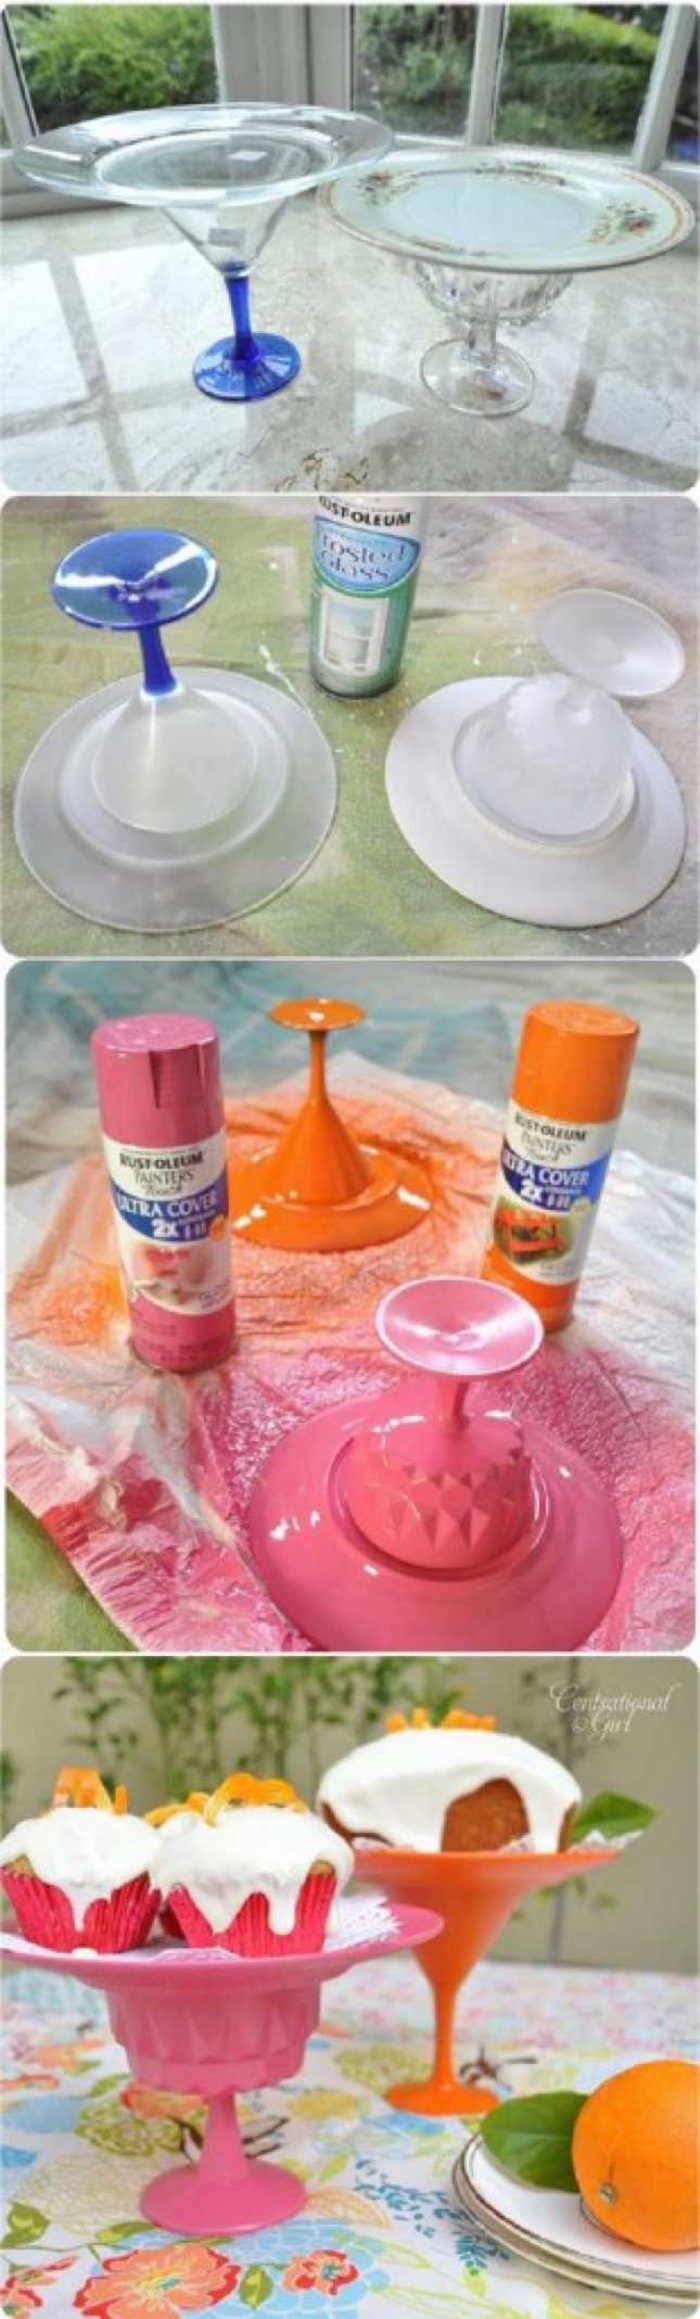 -amazing-Diy-Crafts-twenty-easy-and-practically-free-diy-crafts-that-will-inspire-you14